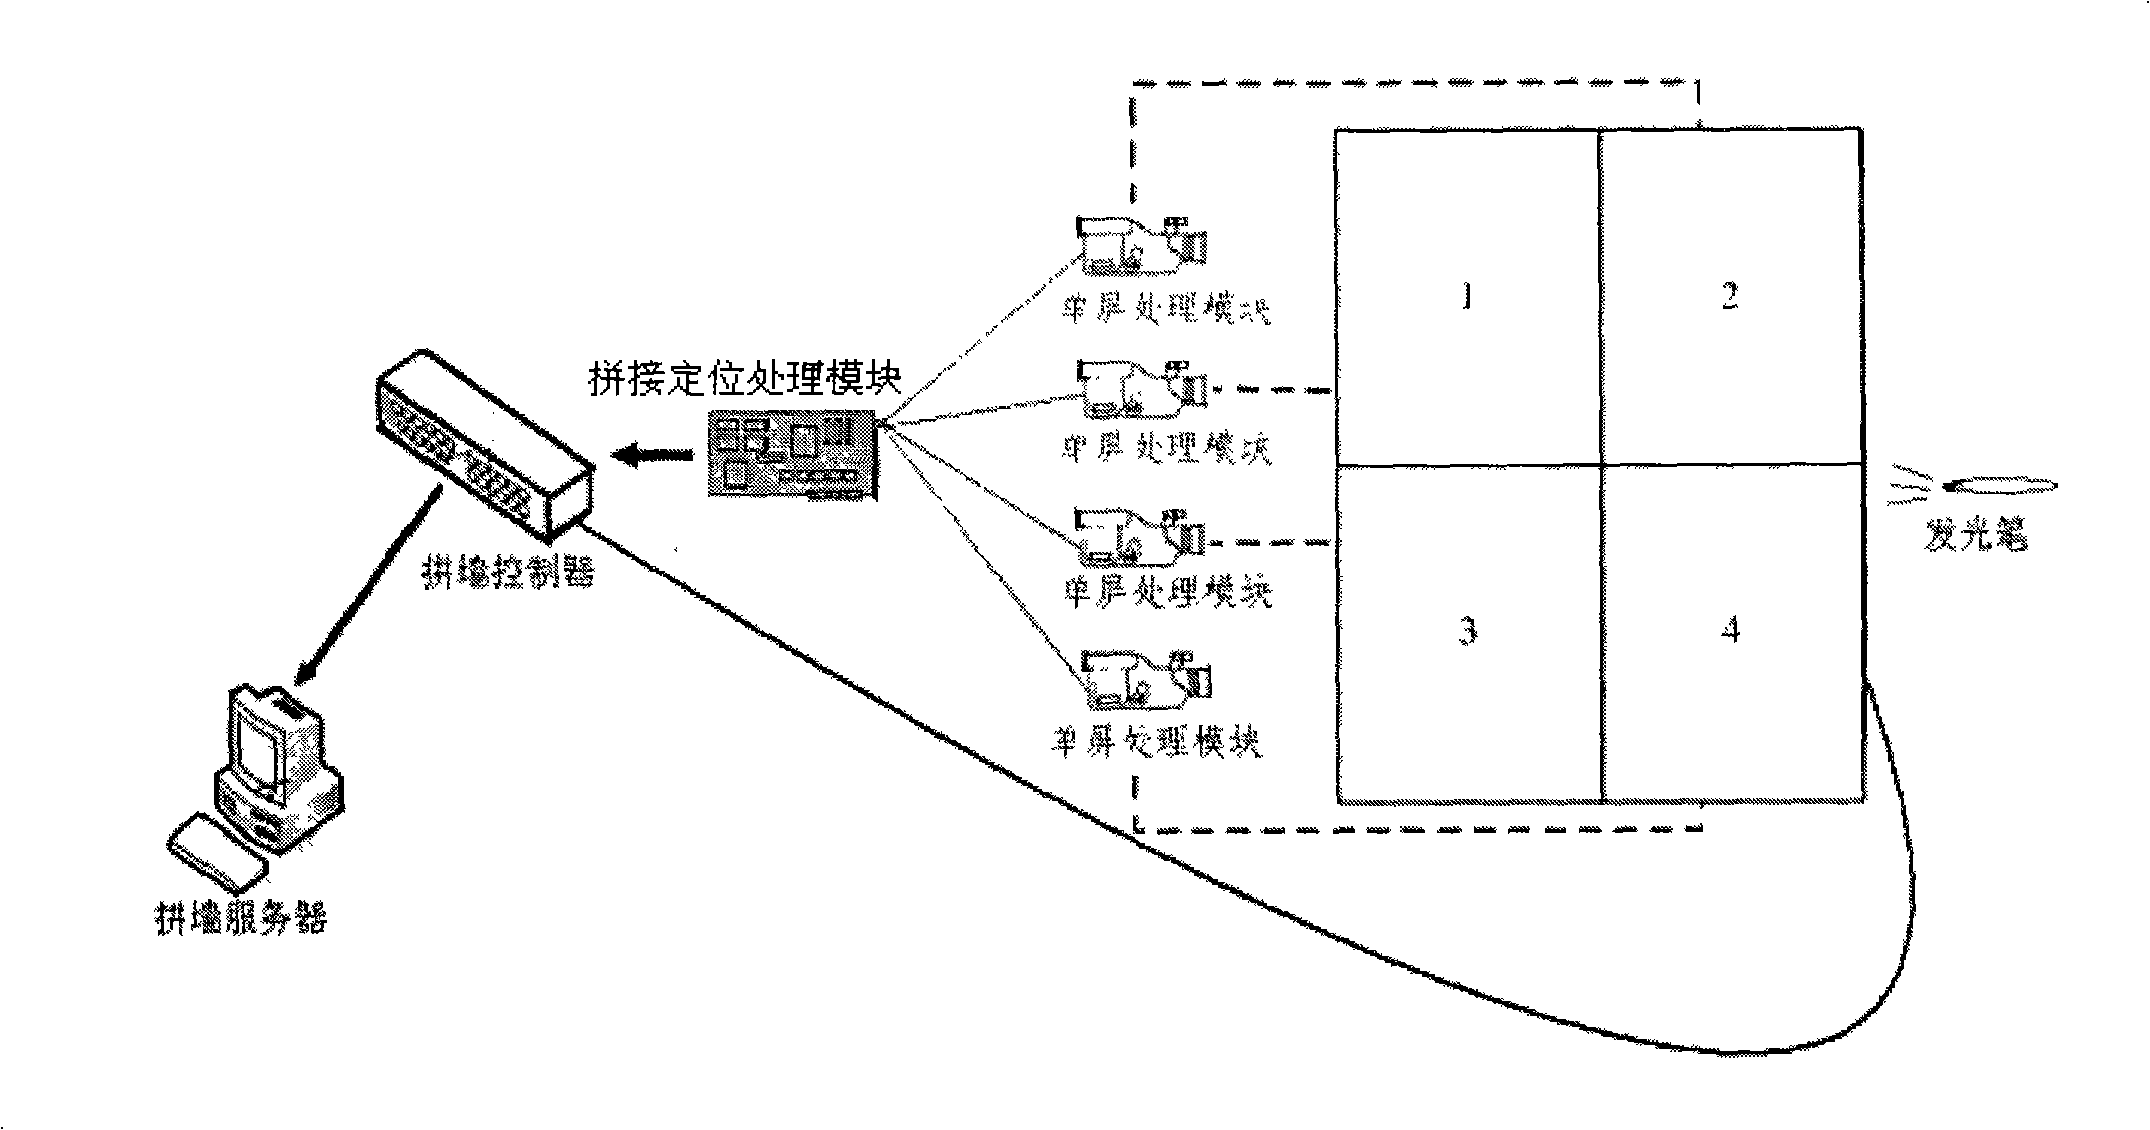 System and method for positioning split joint wall based on image inductor